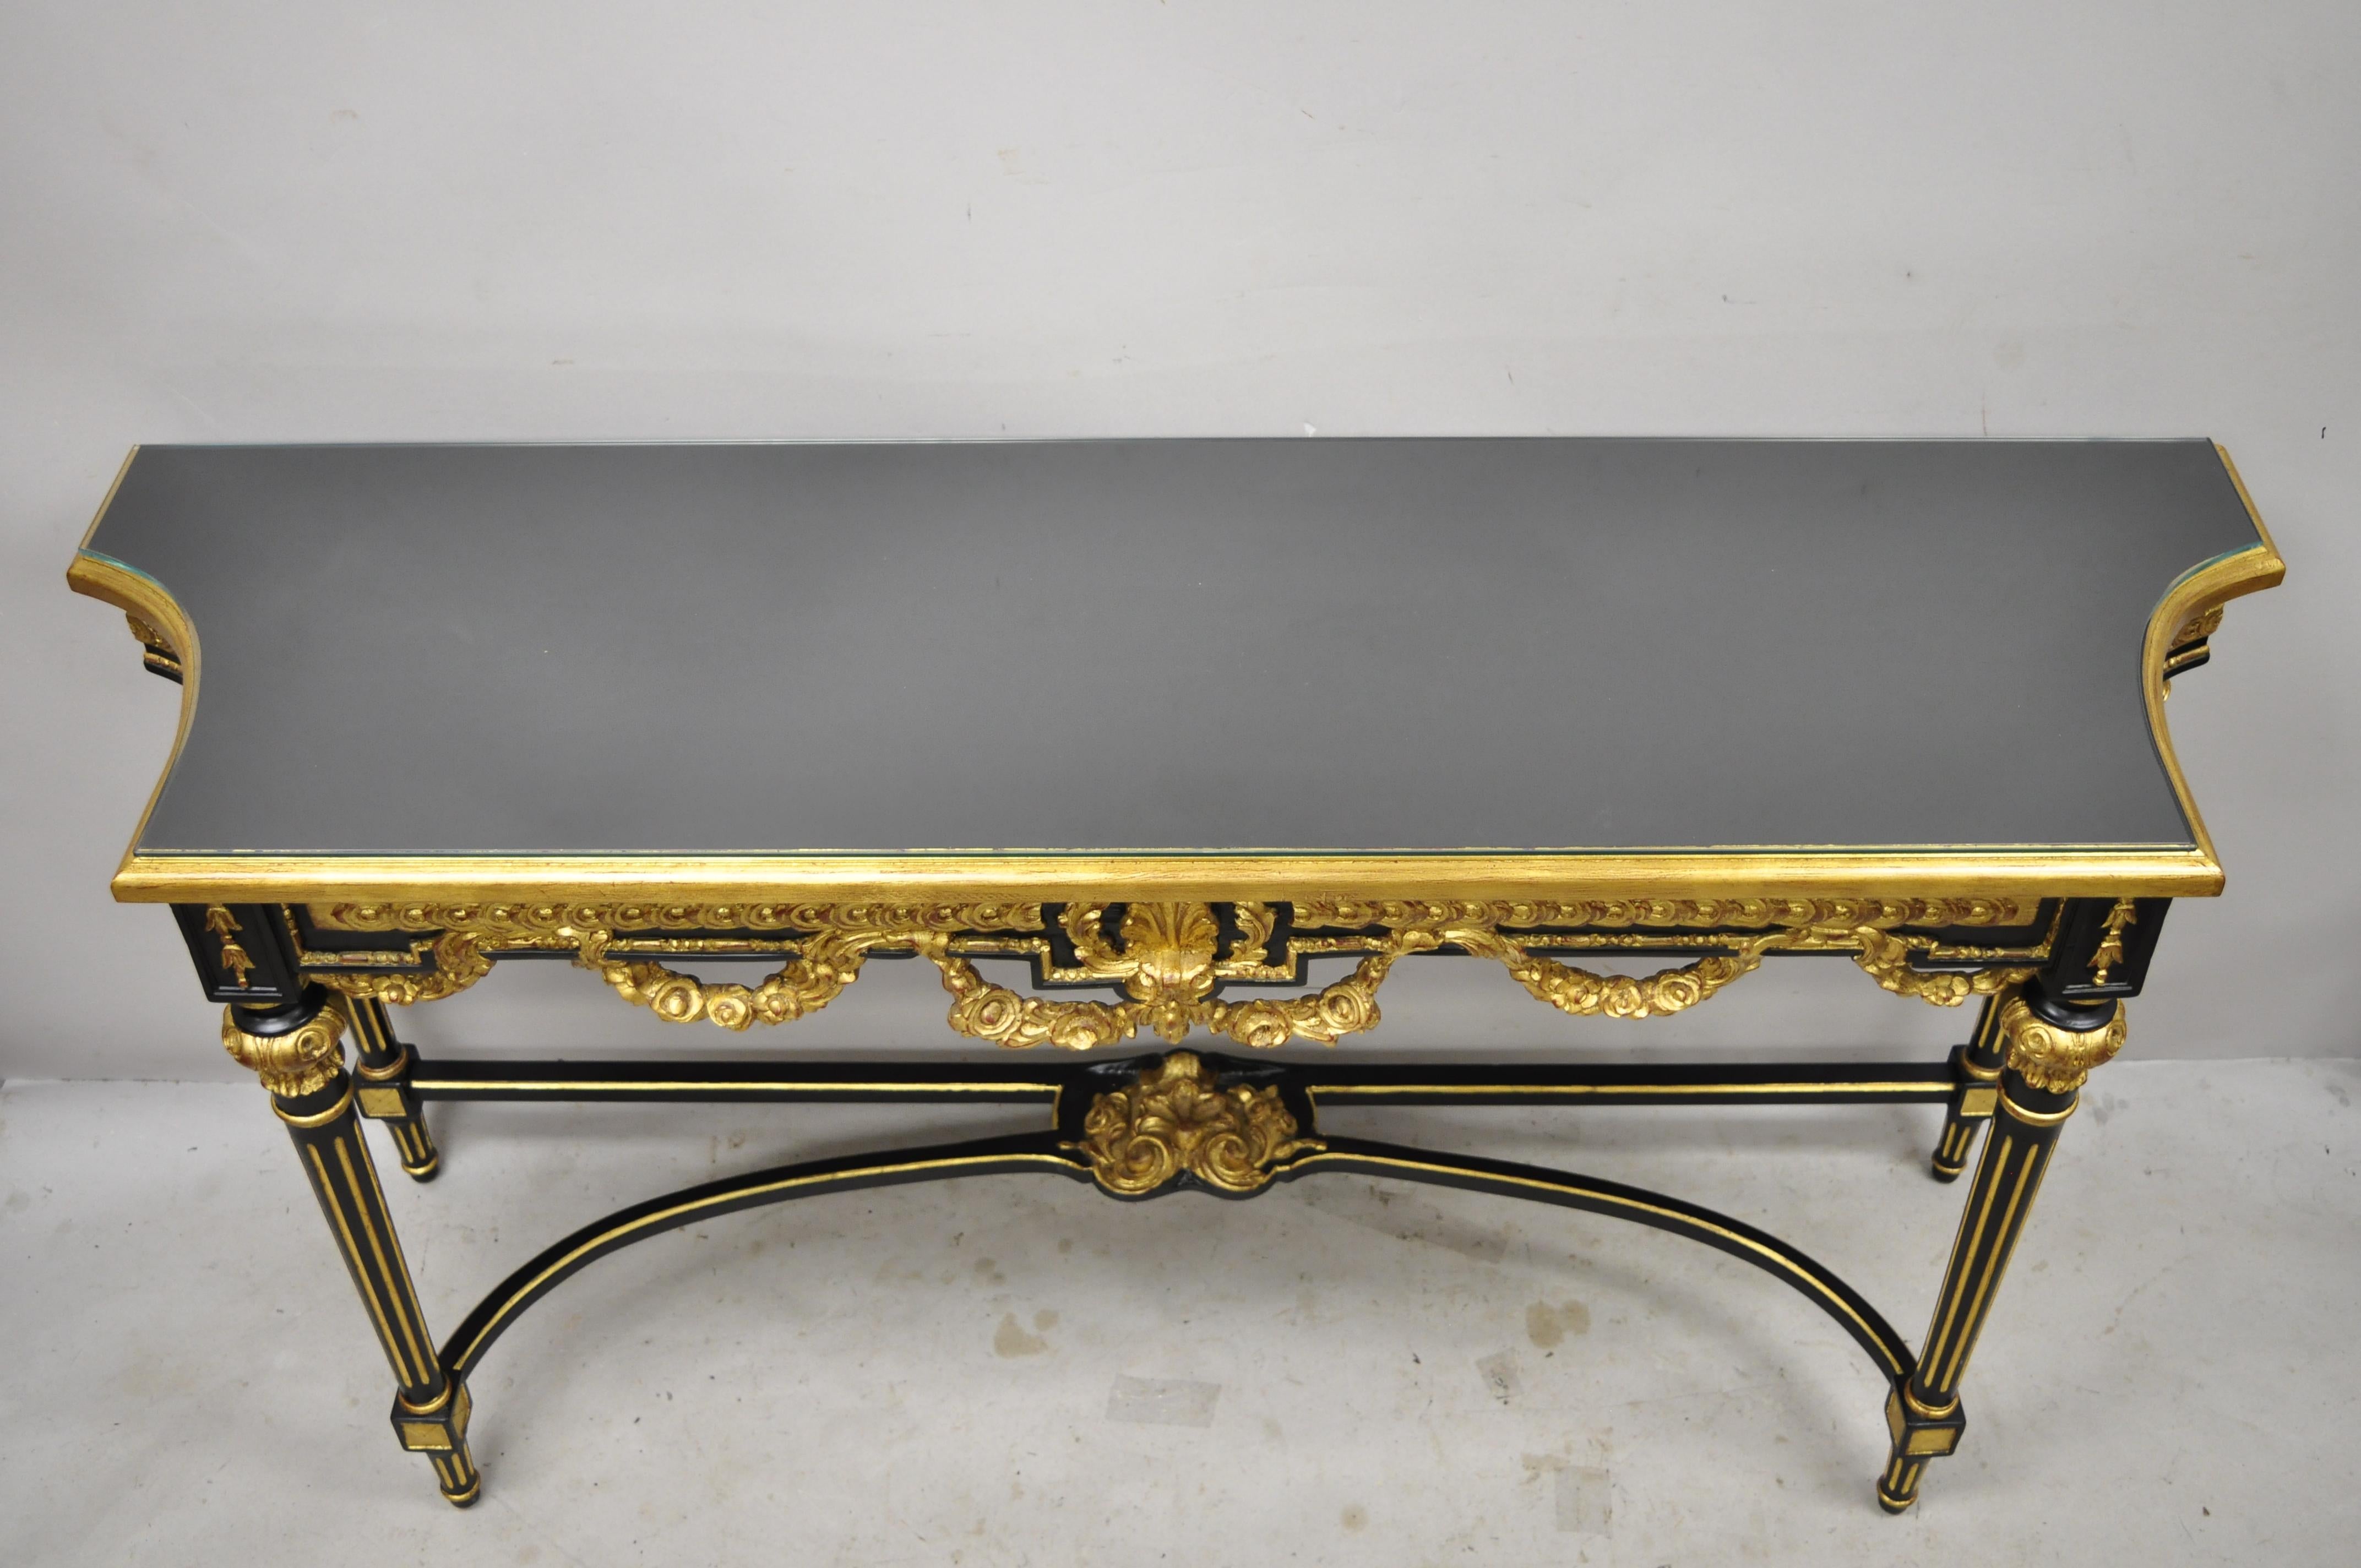 Labarge French Louis XVI style Italian black lacquer gold gilt Jansen style console sofa hall table. Item features custom glass top, gold gilt details, black lacquer finish, solid wood construction, nicely carved details, tapered legs, quality